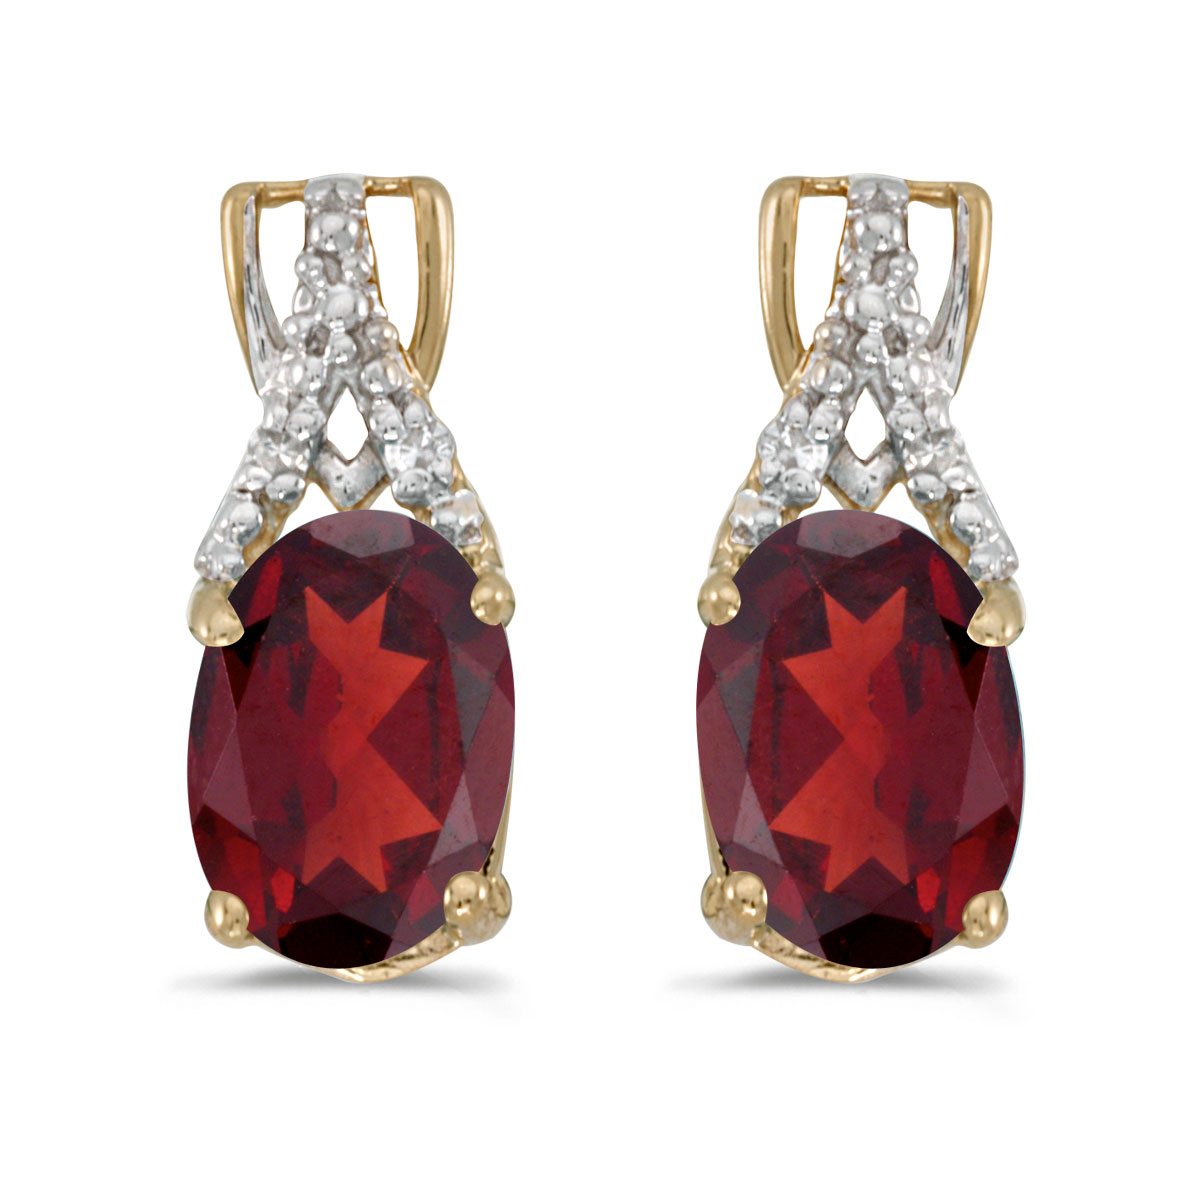 JCX2054: These 14k yellow gold oval garnet and diamond earrings feature 7x5 mm genuine natural garnets with a 1.40 ct total weight and sparkling diamond accents.